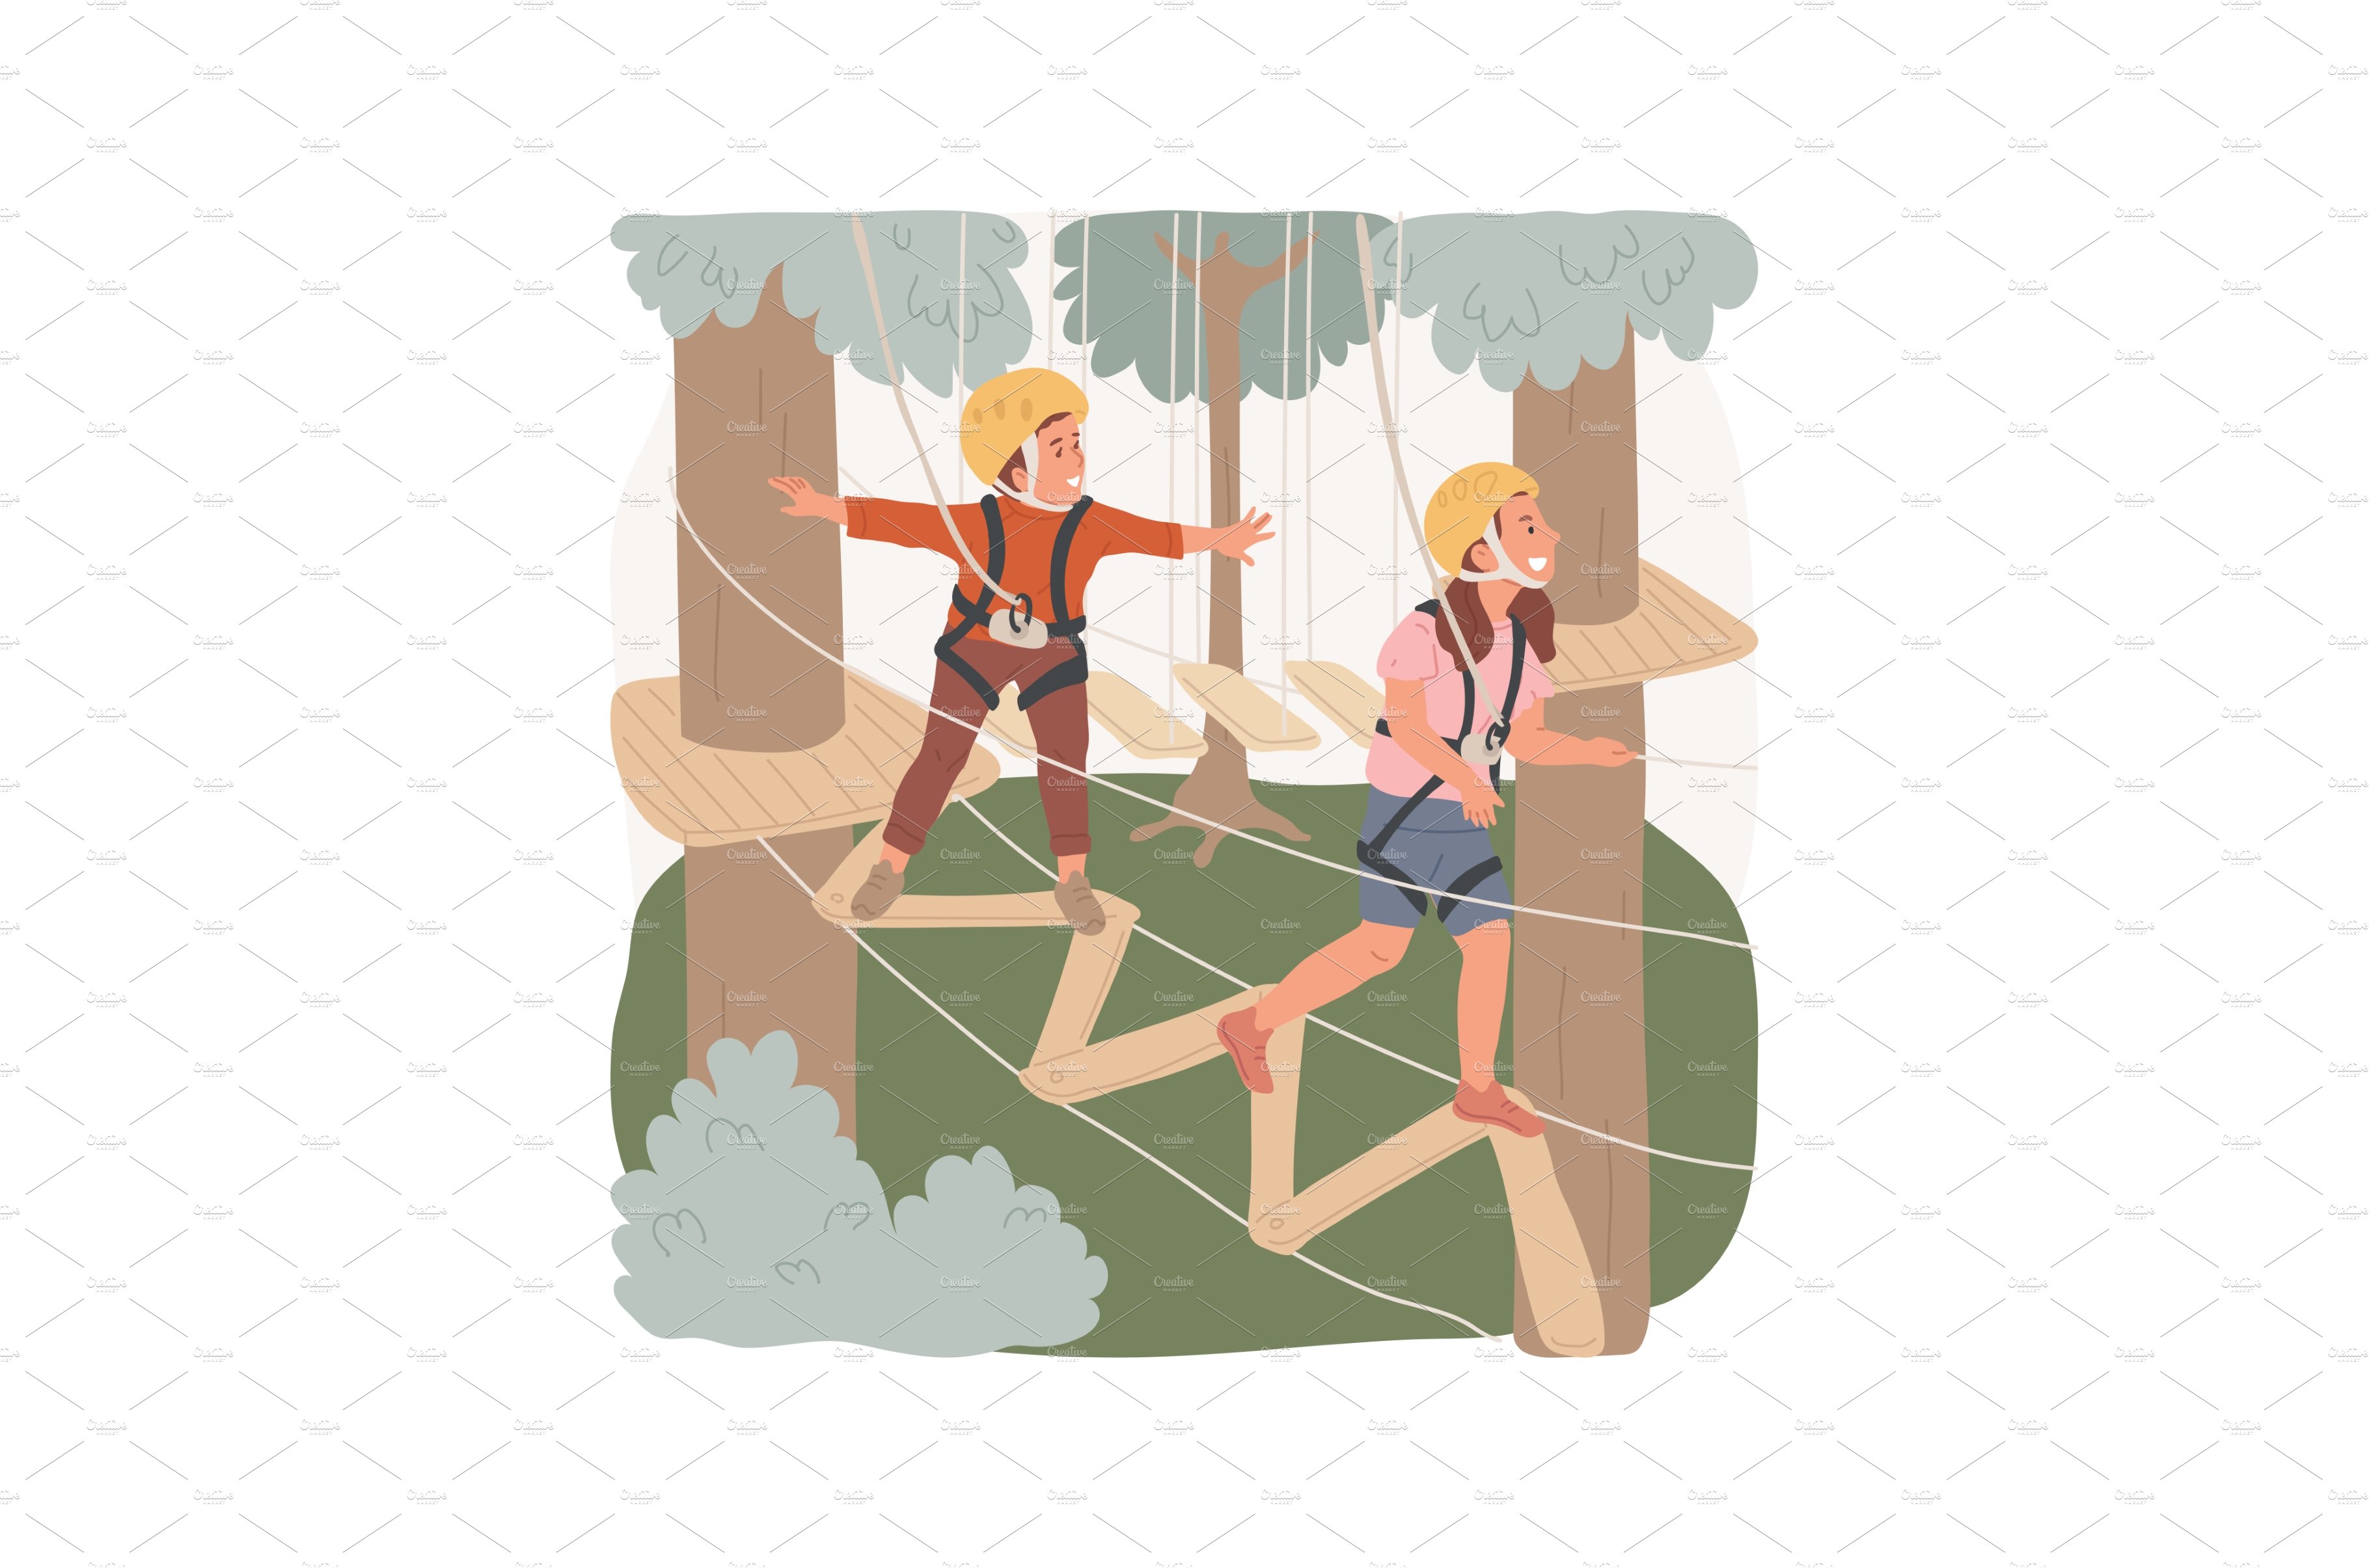 Tree ropes course isolated cartoon cover image.